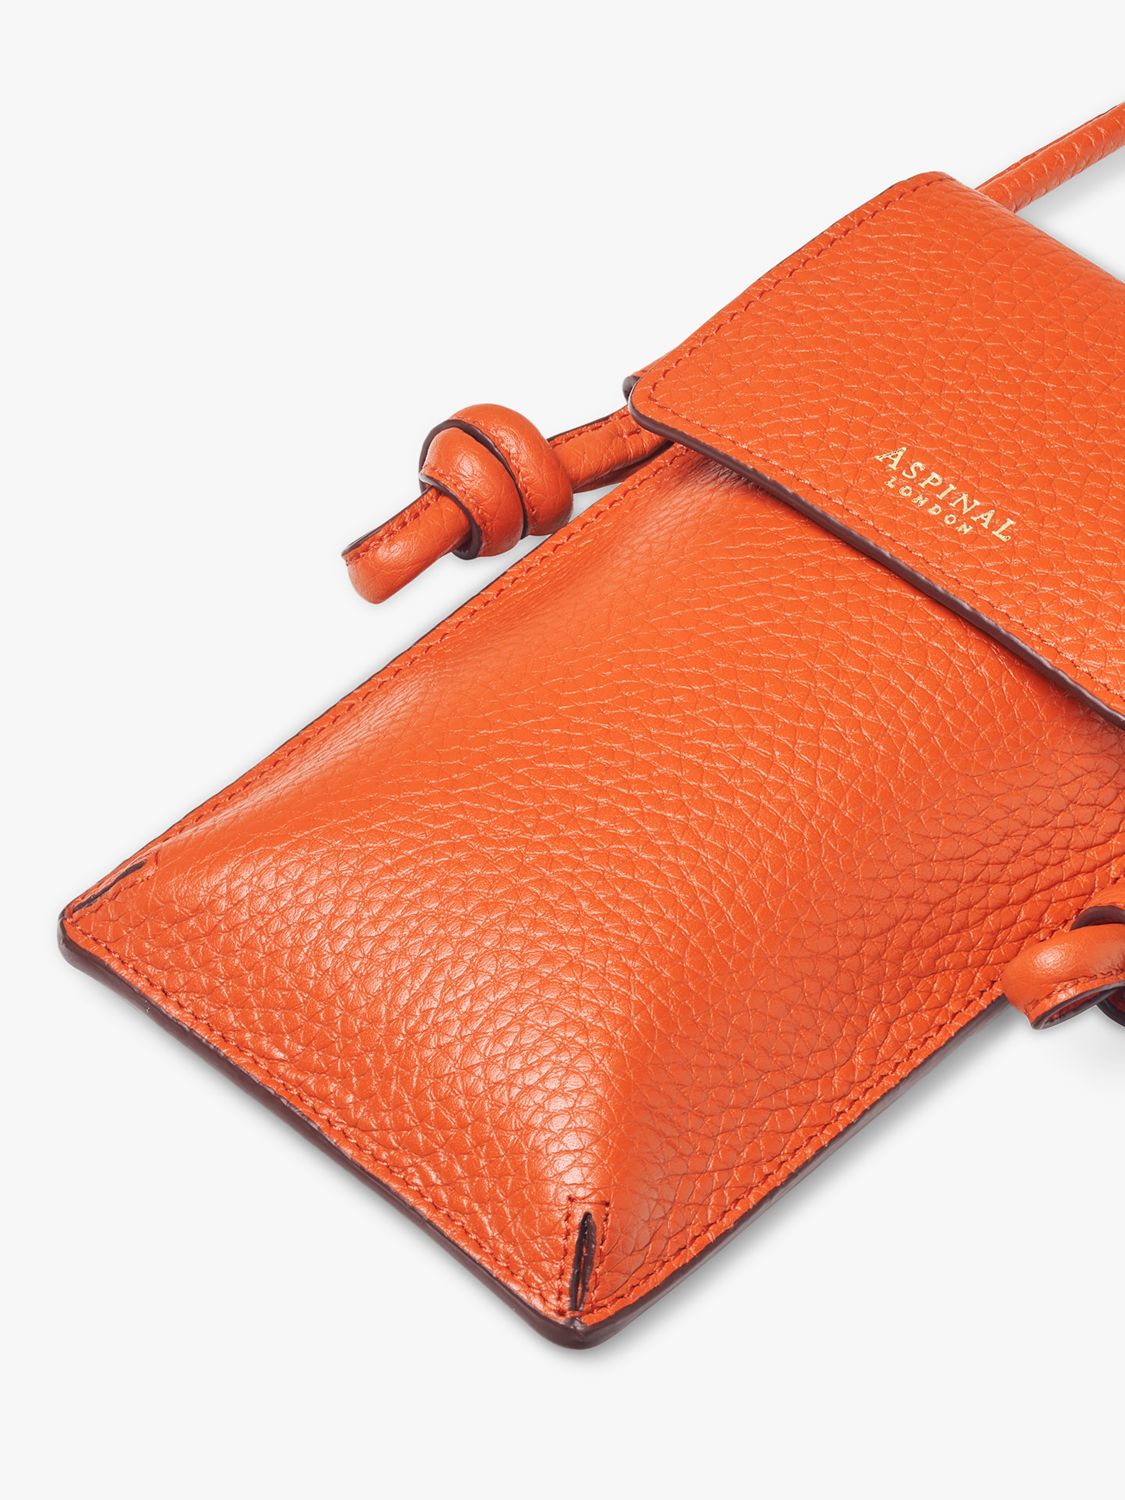 Buy Aspinal of London Ella Pebble Leather Phone Pouch Online at johnlewis.com